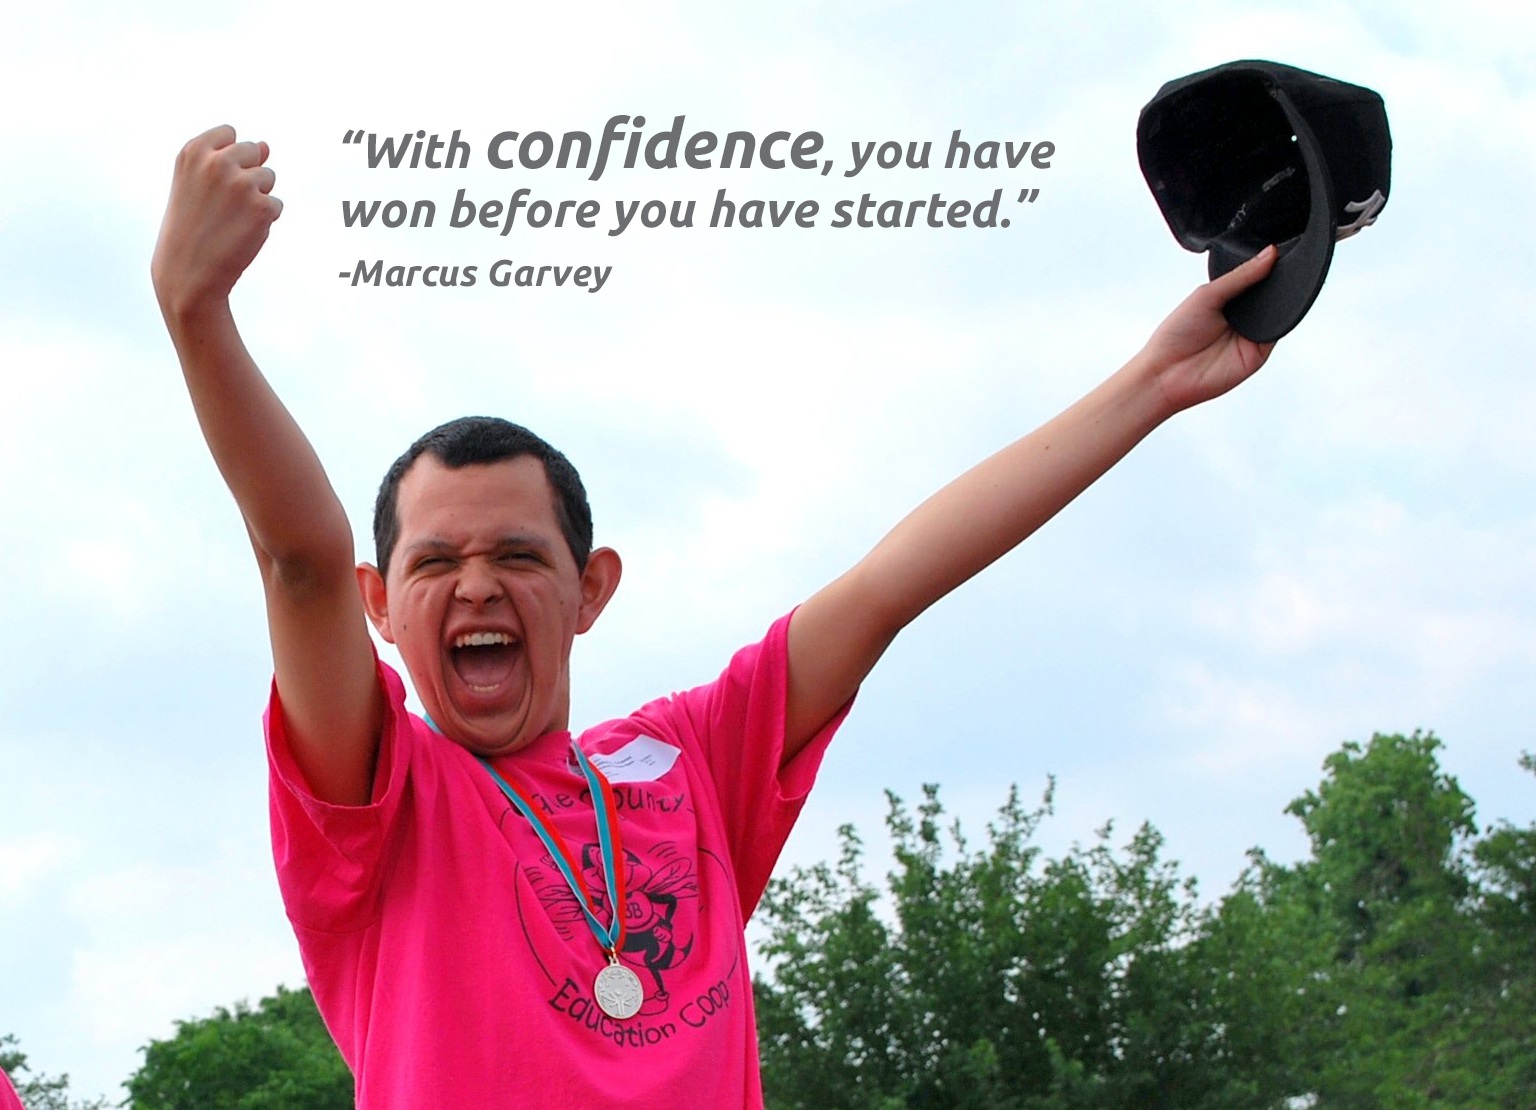 Inspirational Quotes From Special Olympics. QuotesGram